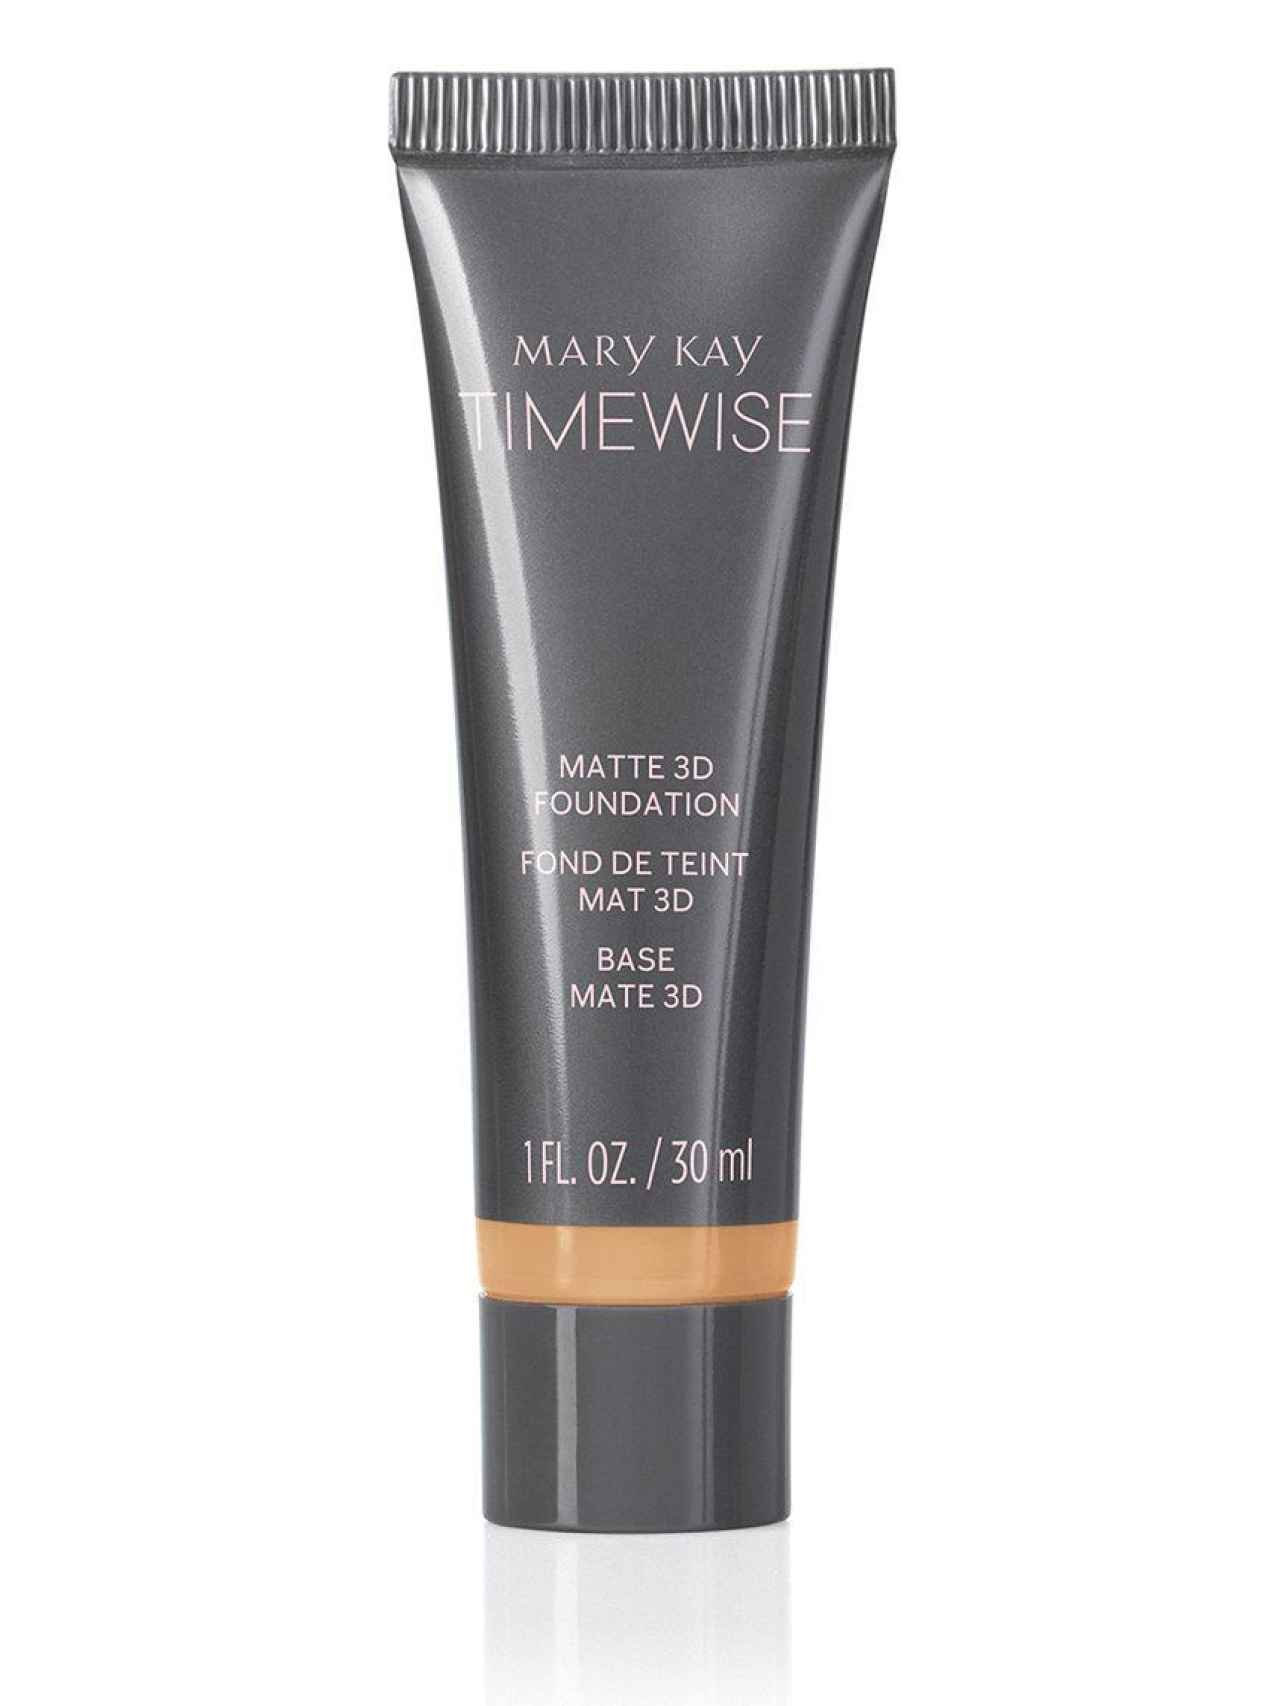 Timewise 3D de Mary Kay.